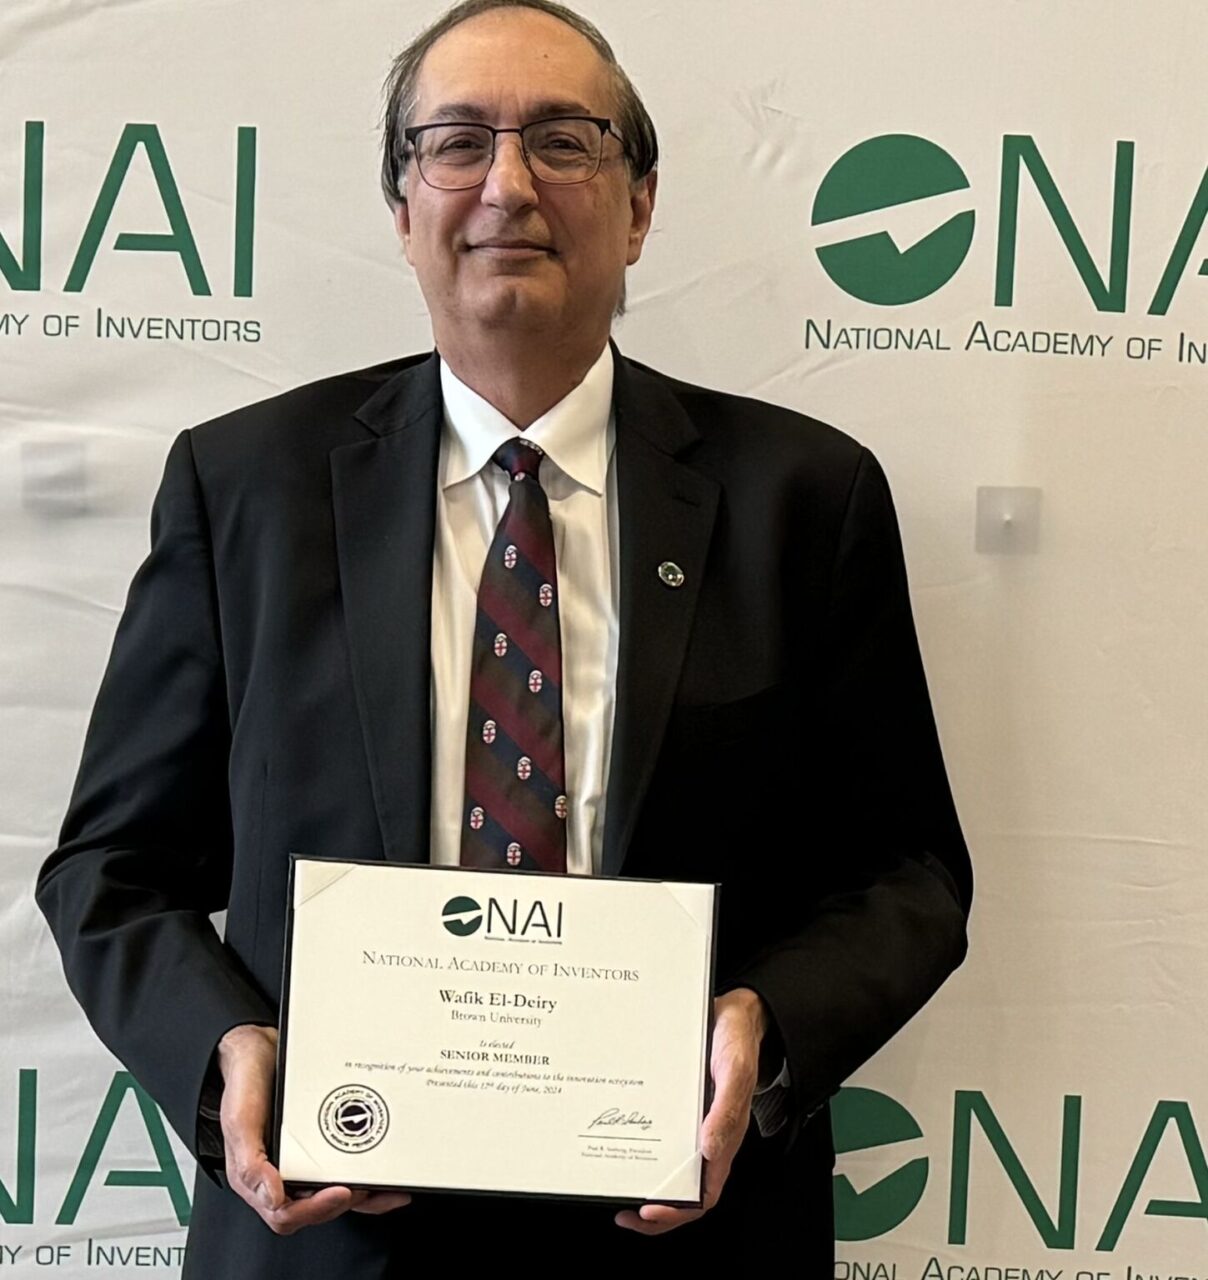 Wafik S. El-Deiry: Honored to be inducted as Senior Member of National Academy of Inventors